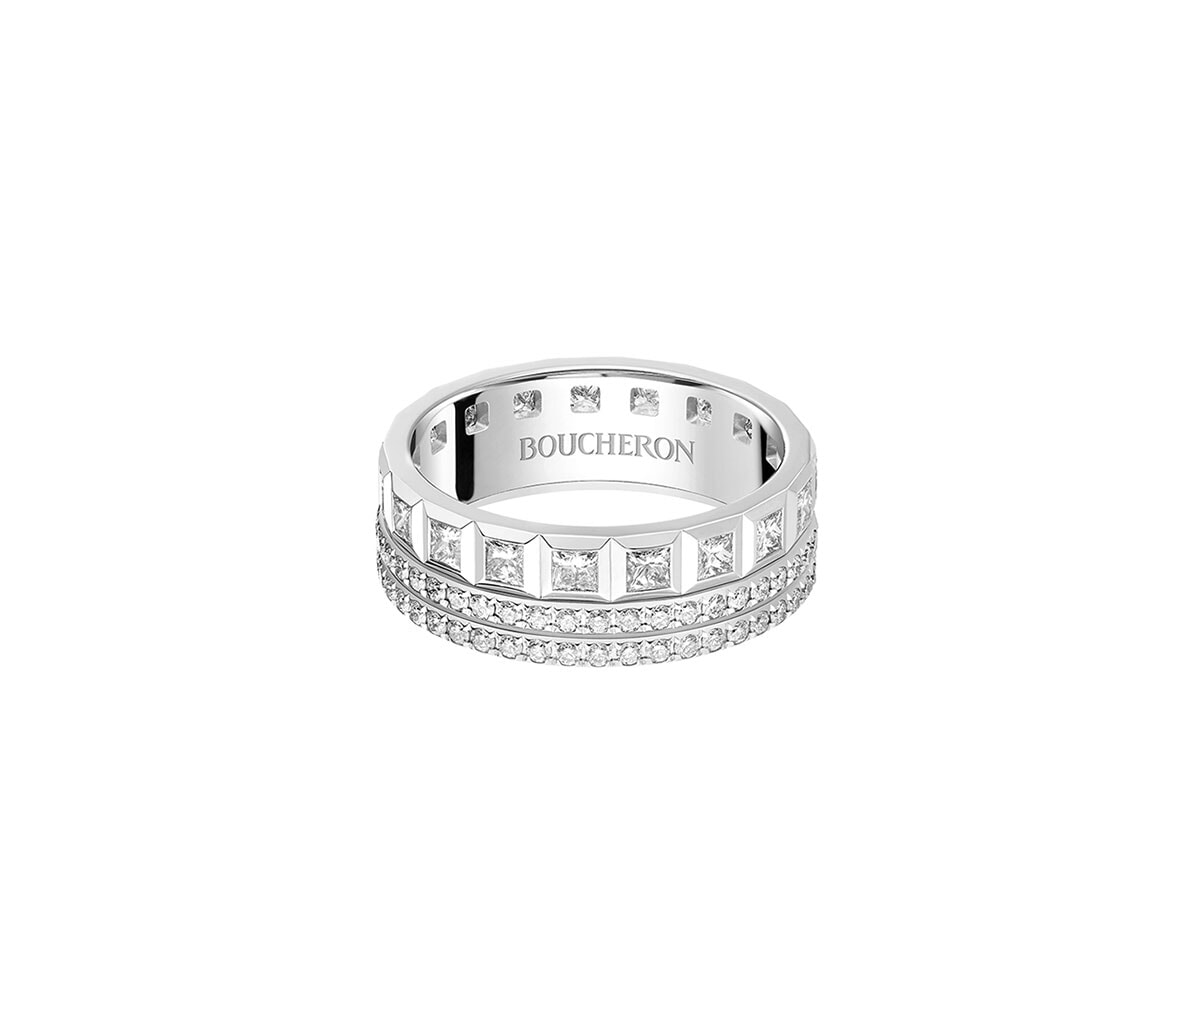 240126_2_Quatre-Radiant-Edition-large-wedding-band,-paved-with-diamonds,-in-white-gold.jpg